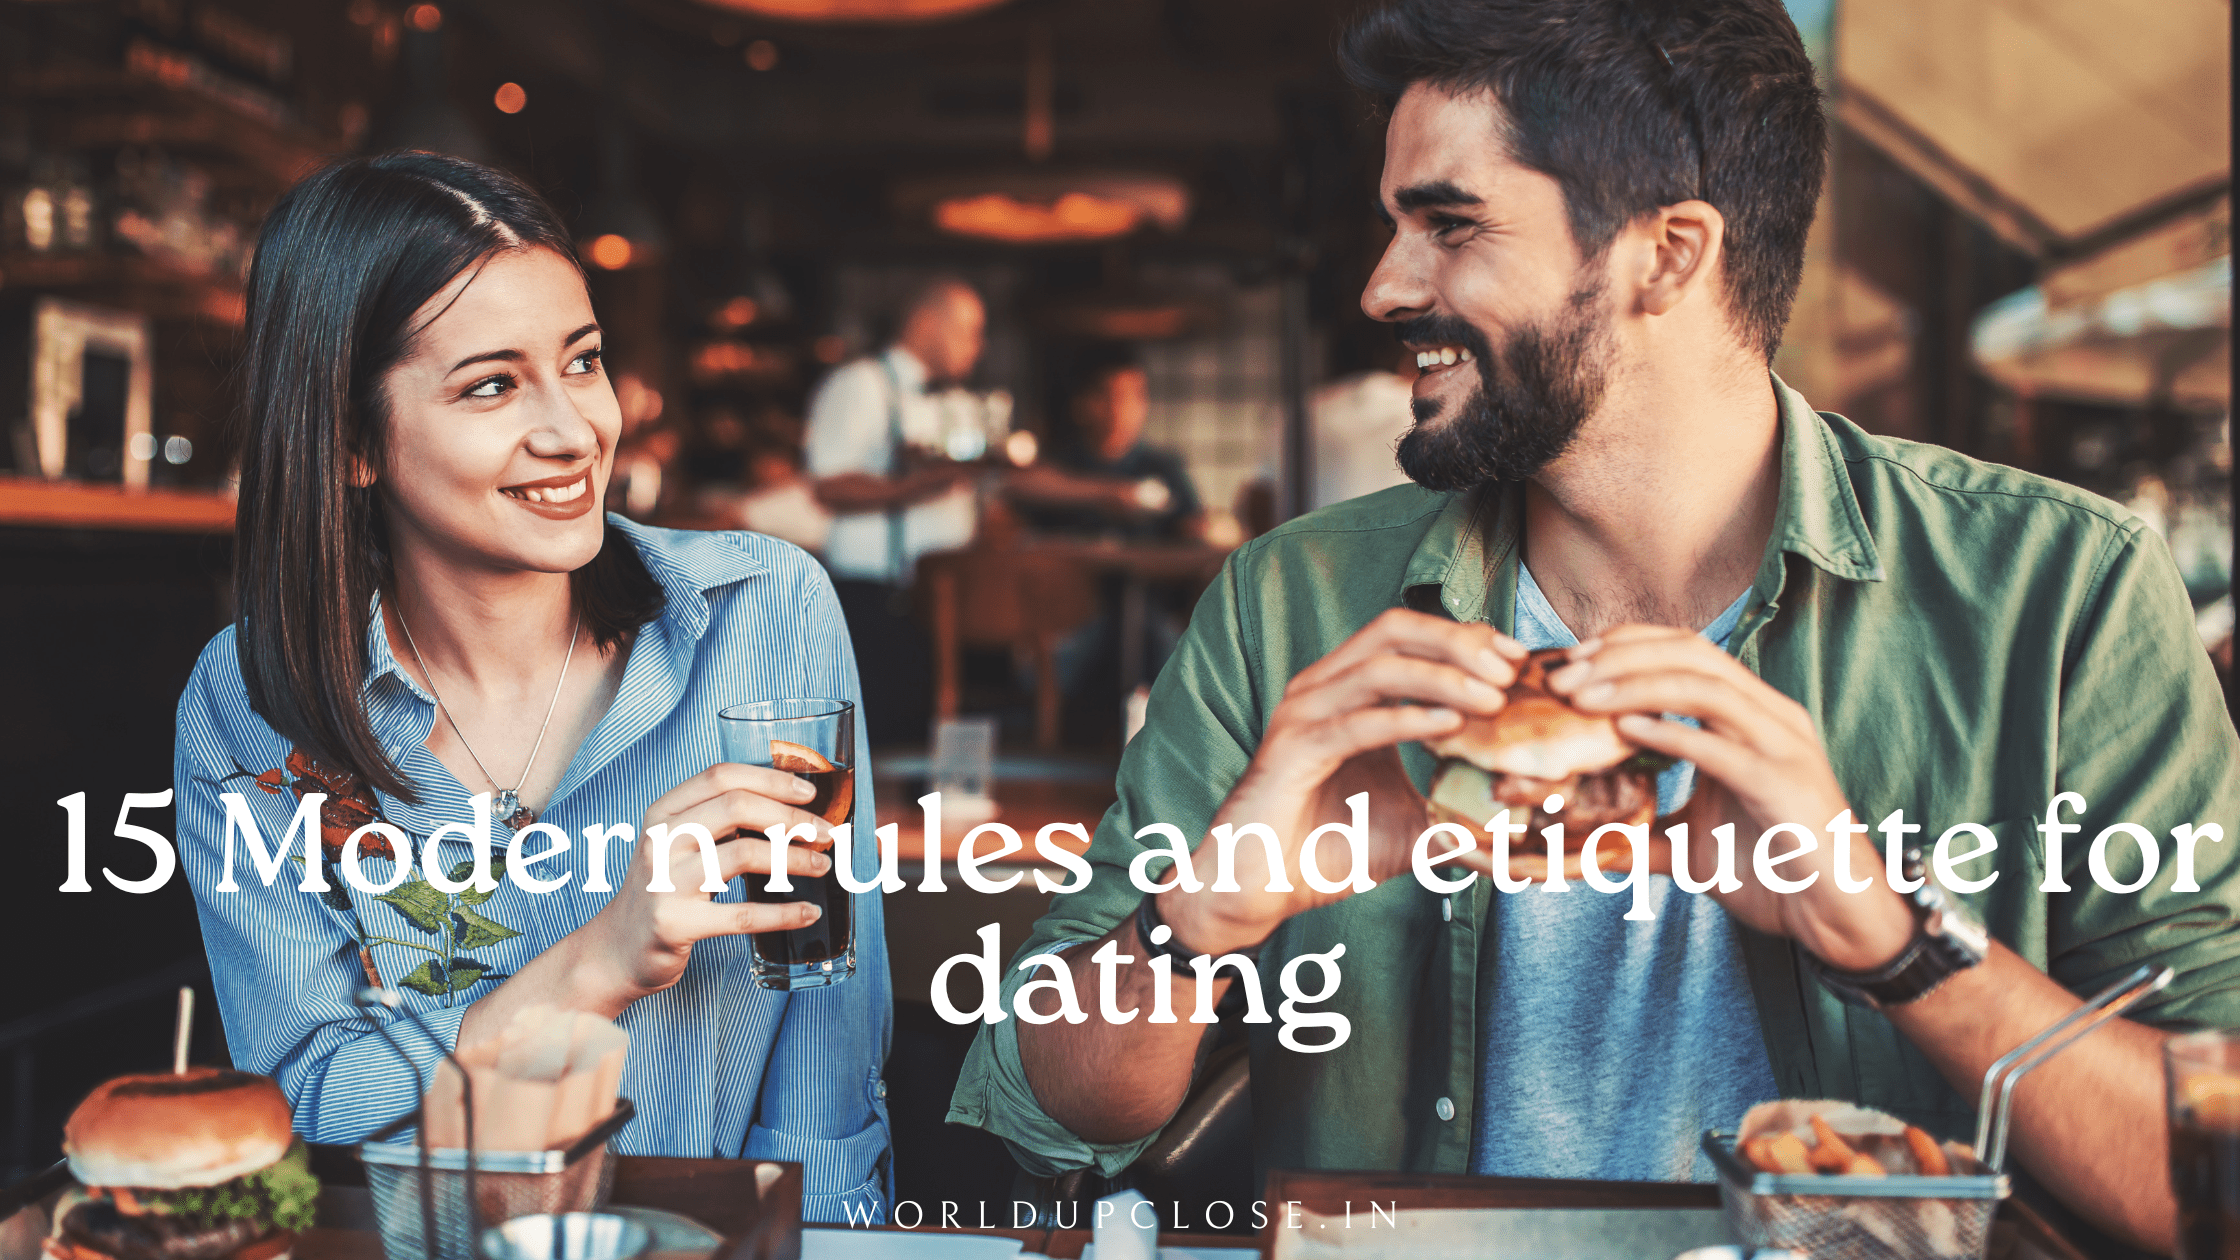 15 Modern rules and etiquette for dating 26